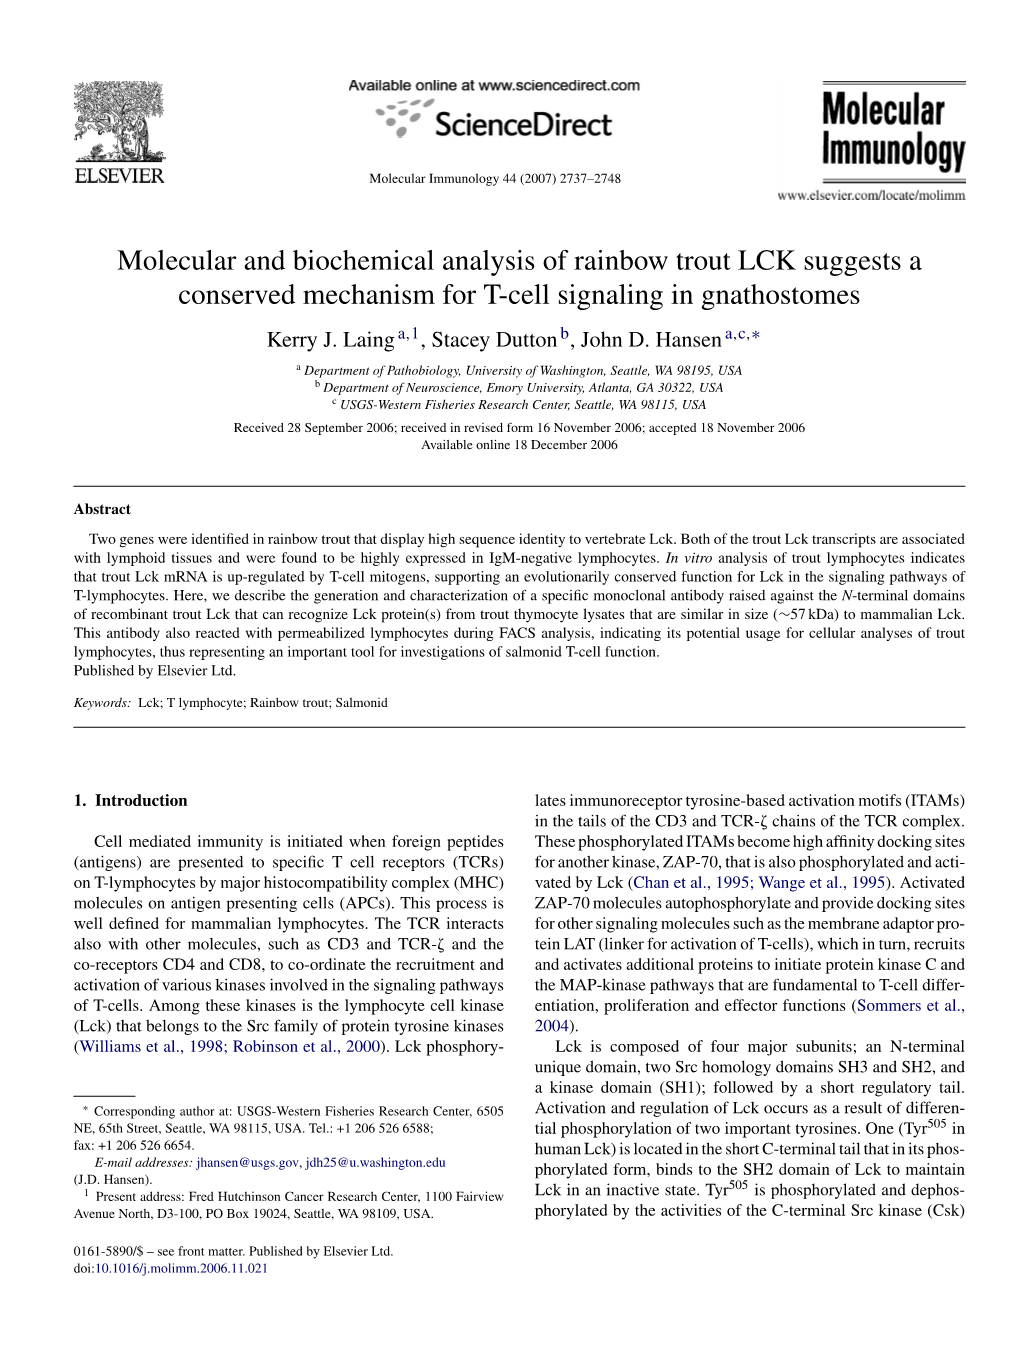 Molecular and Biomechanical Analysis of Rainbow Trout LCK Suggests A